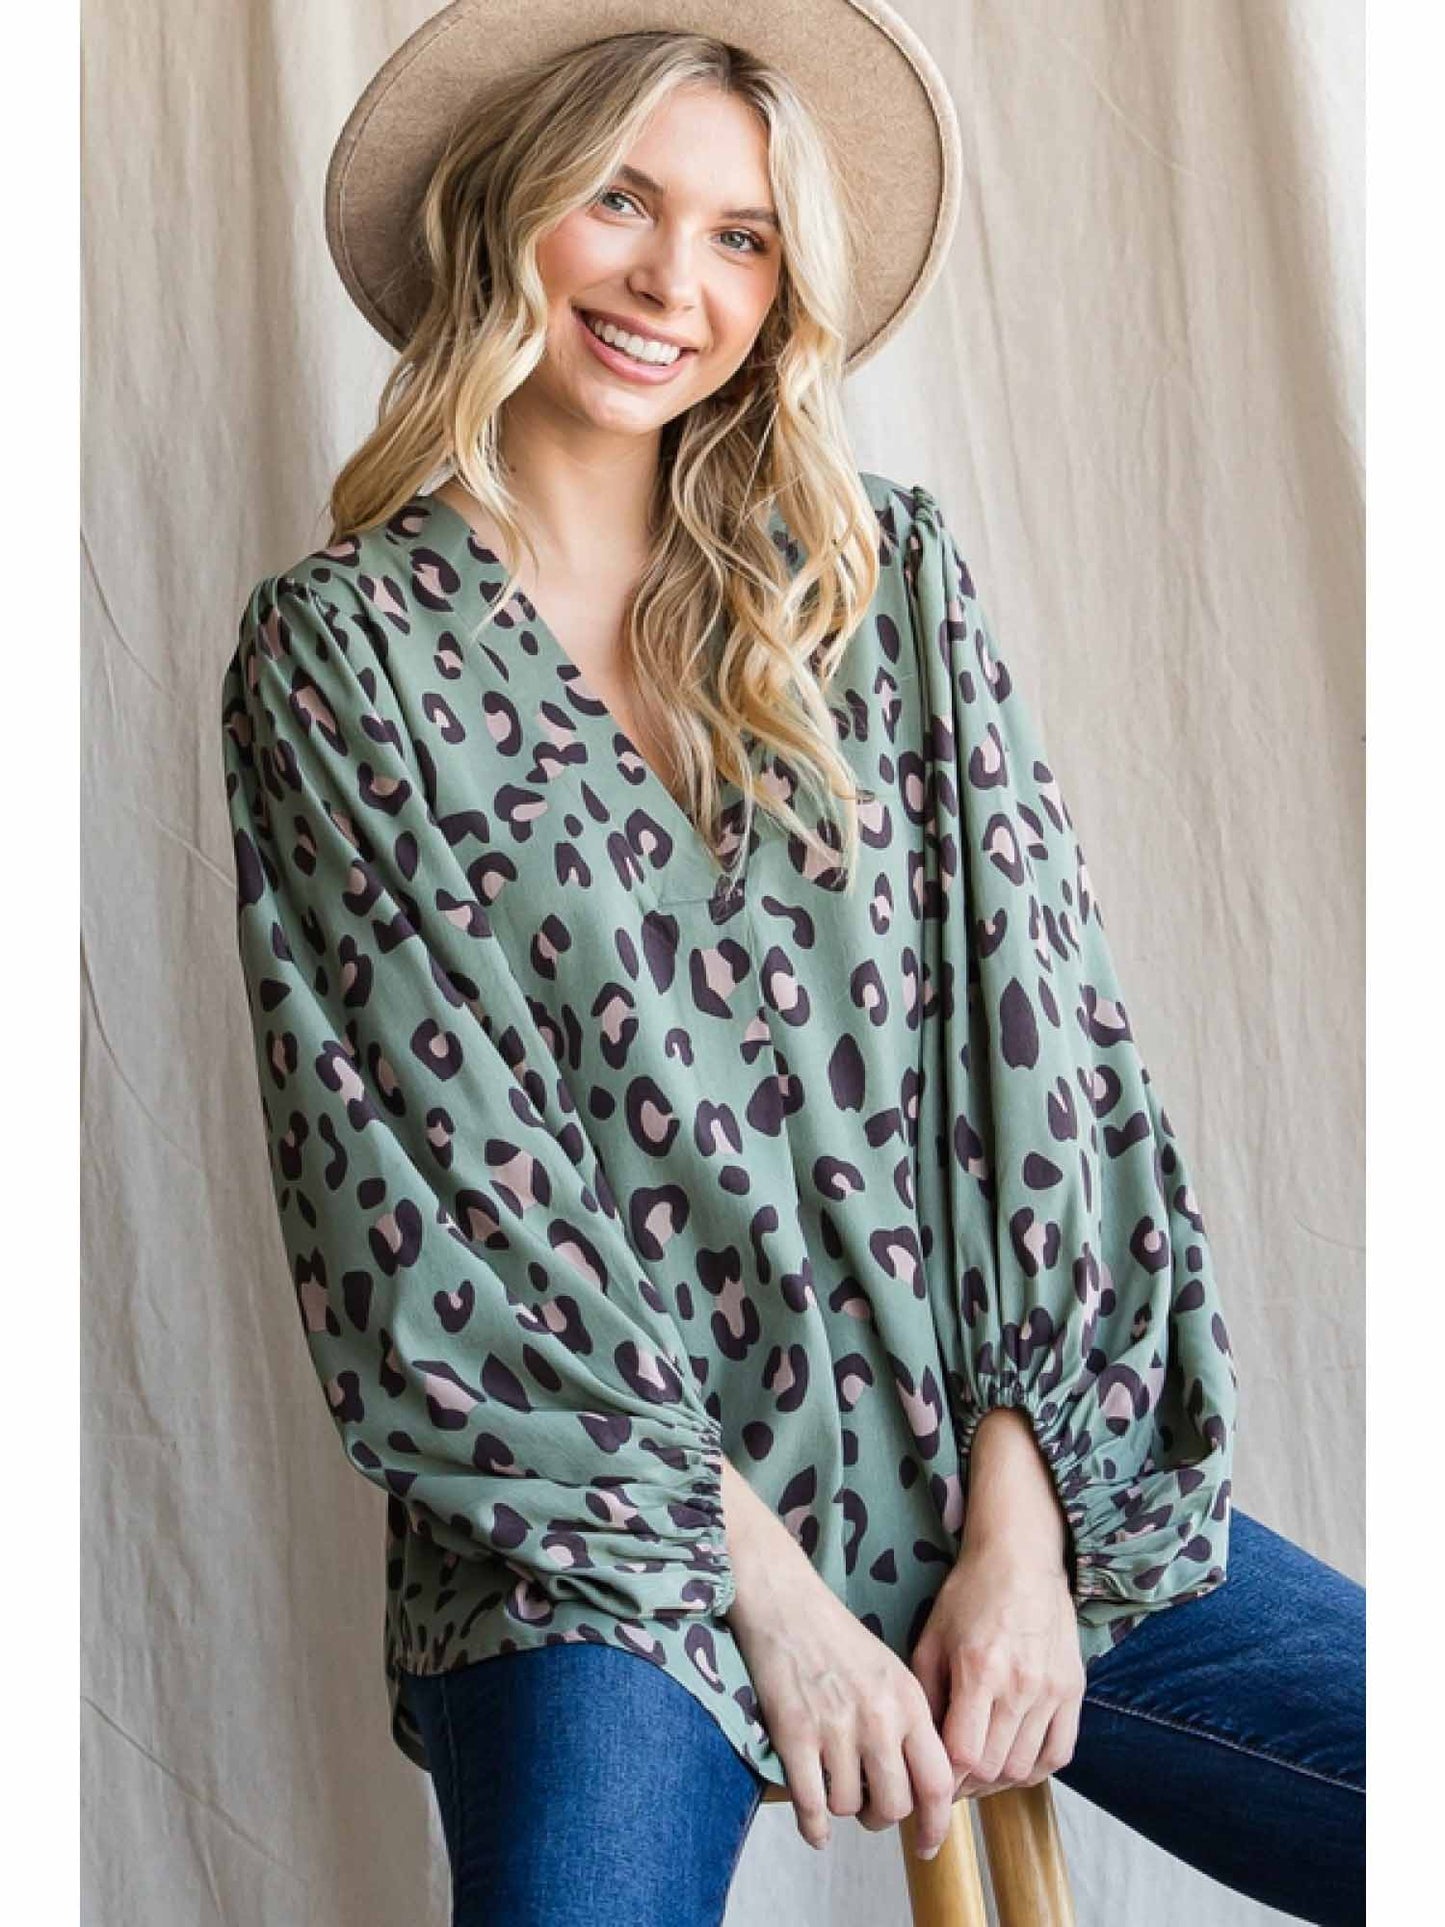 Leopard Print V-Neckline Top with Bubble Sleeves by Jodifl